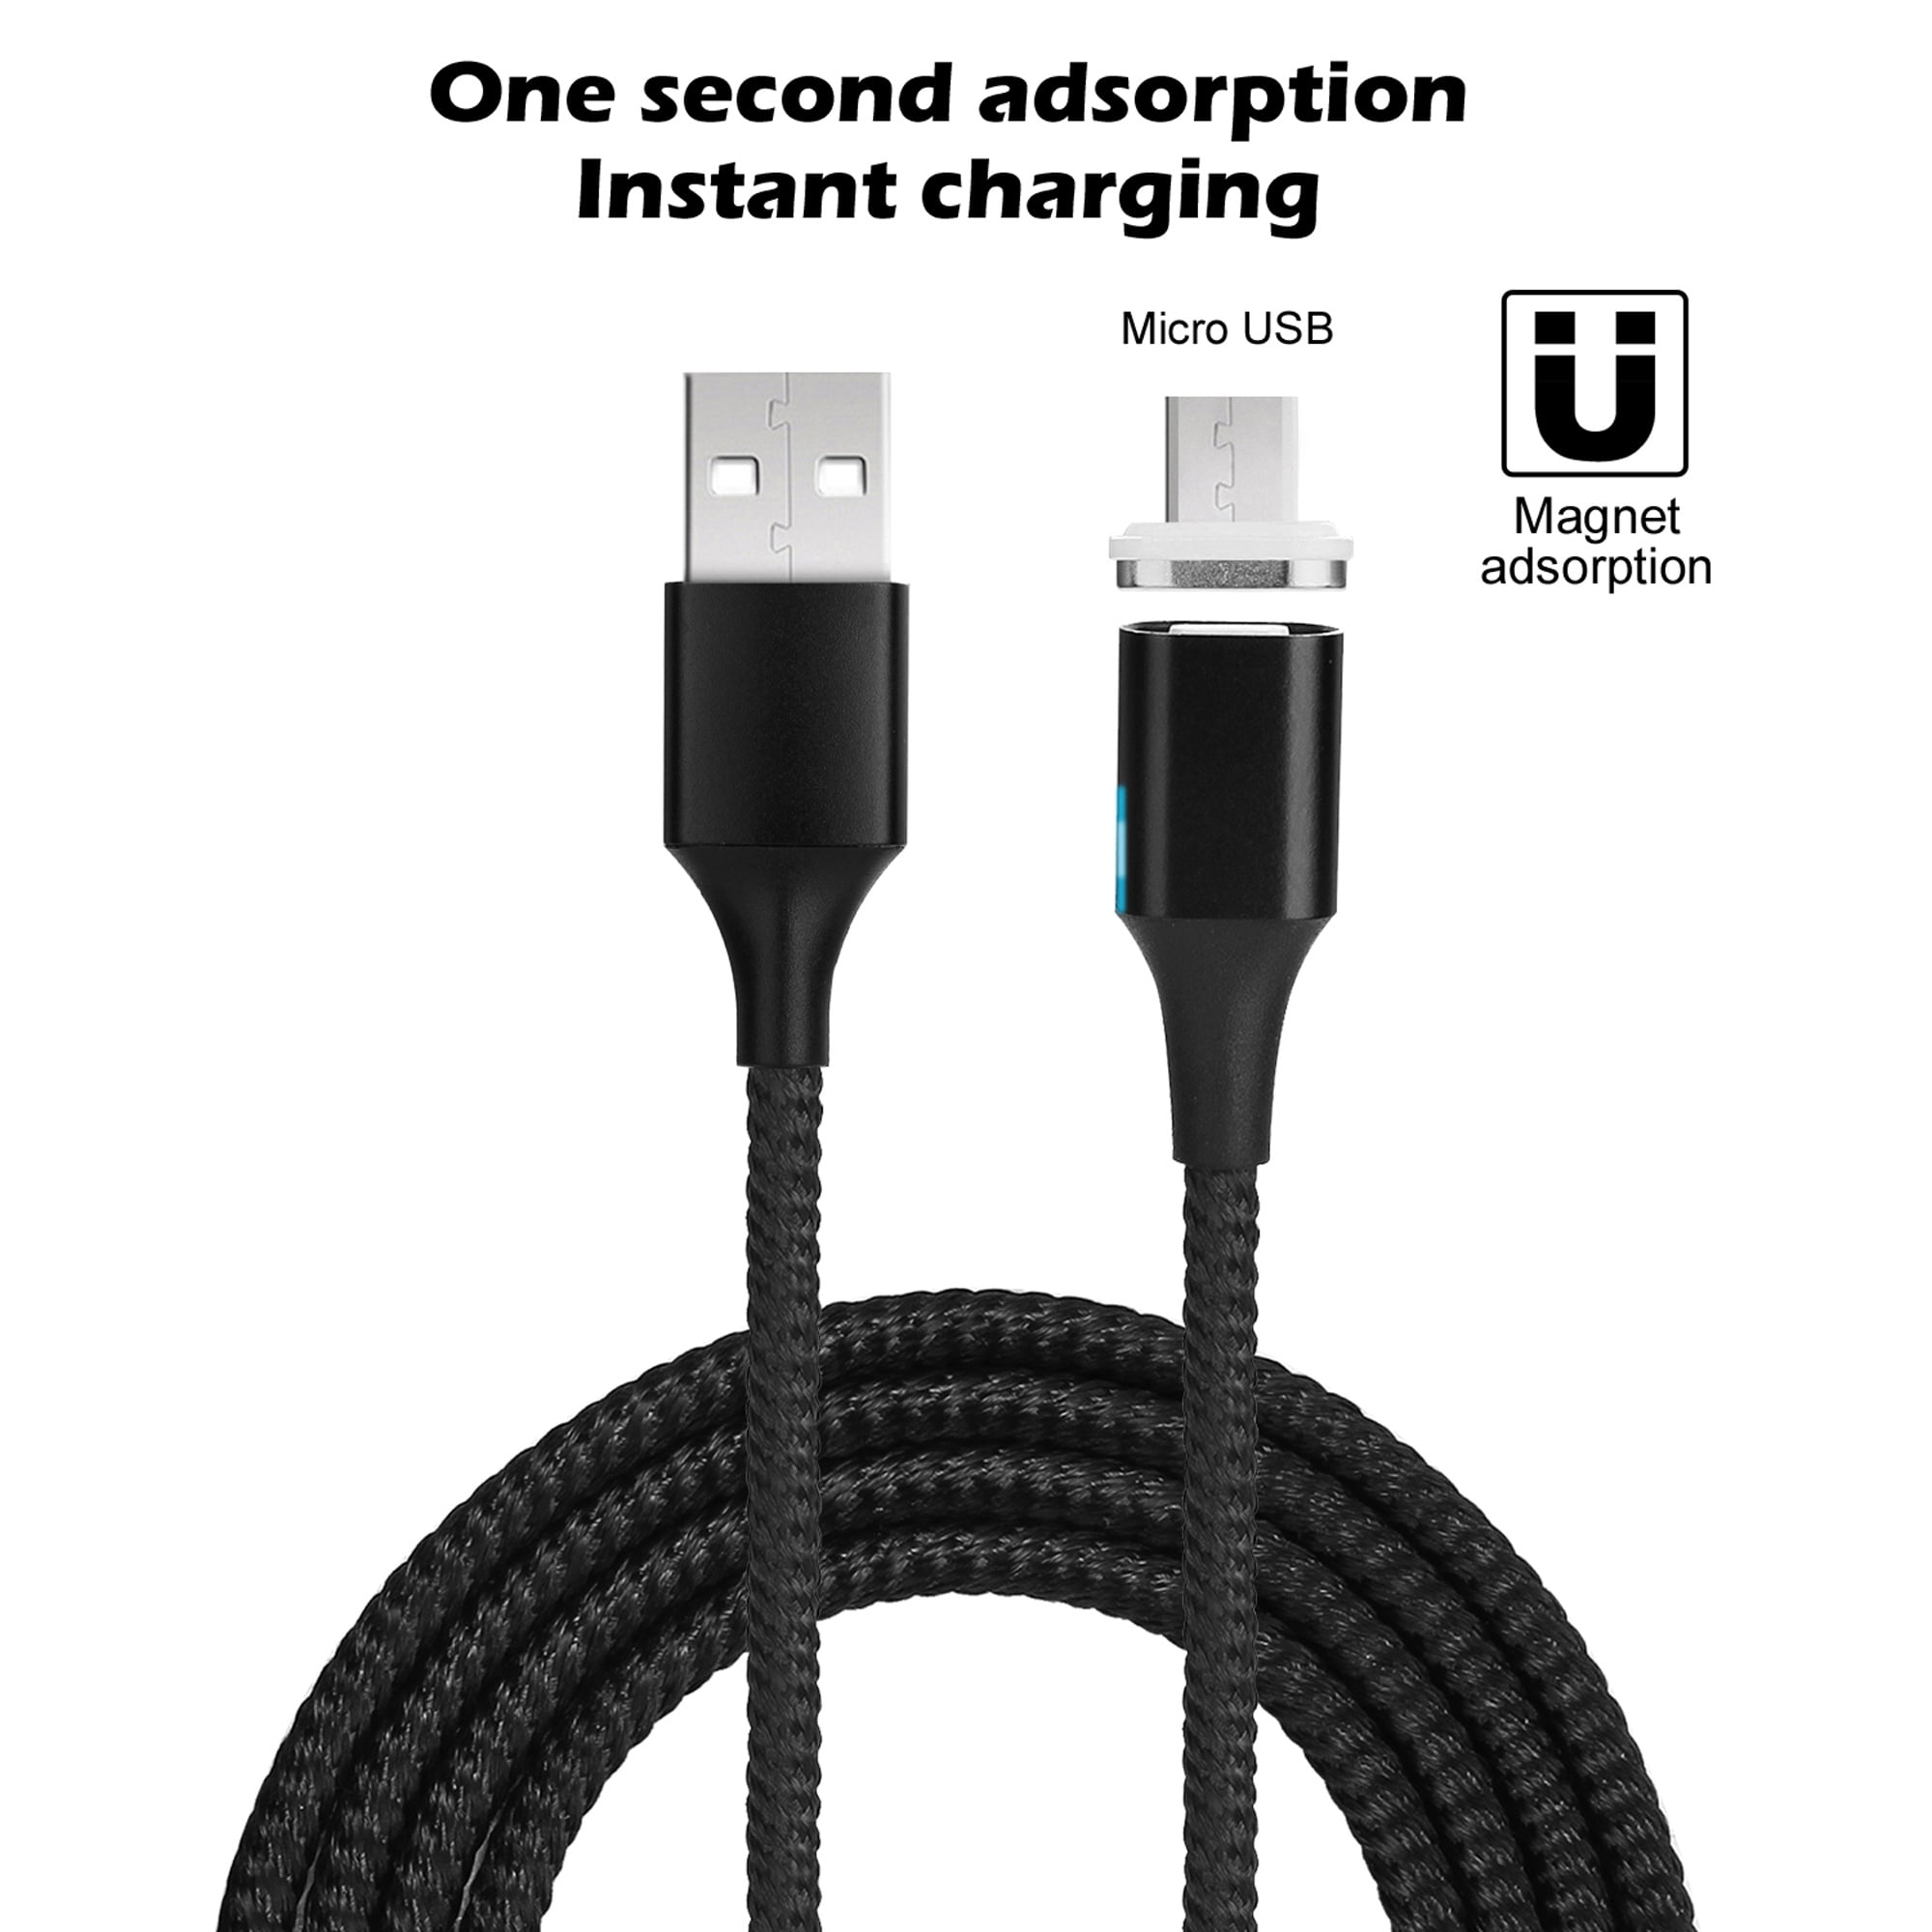 Support Max 3.0A Charging Current & Data Sync USB-C and Micro-USB Devices Blue-3pack, 3.3 Feet Compatible with i-Product Smart&Cool Gen-X 3 in 1 Magnetic Charging Cable 